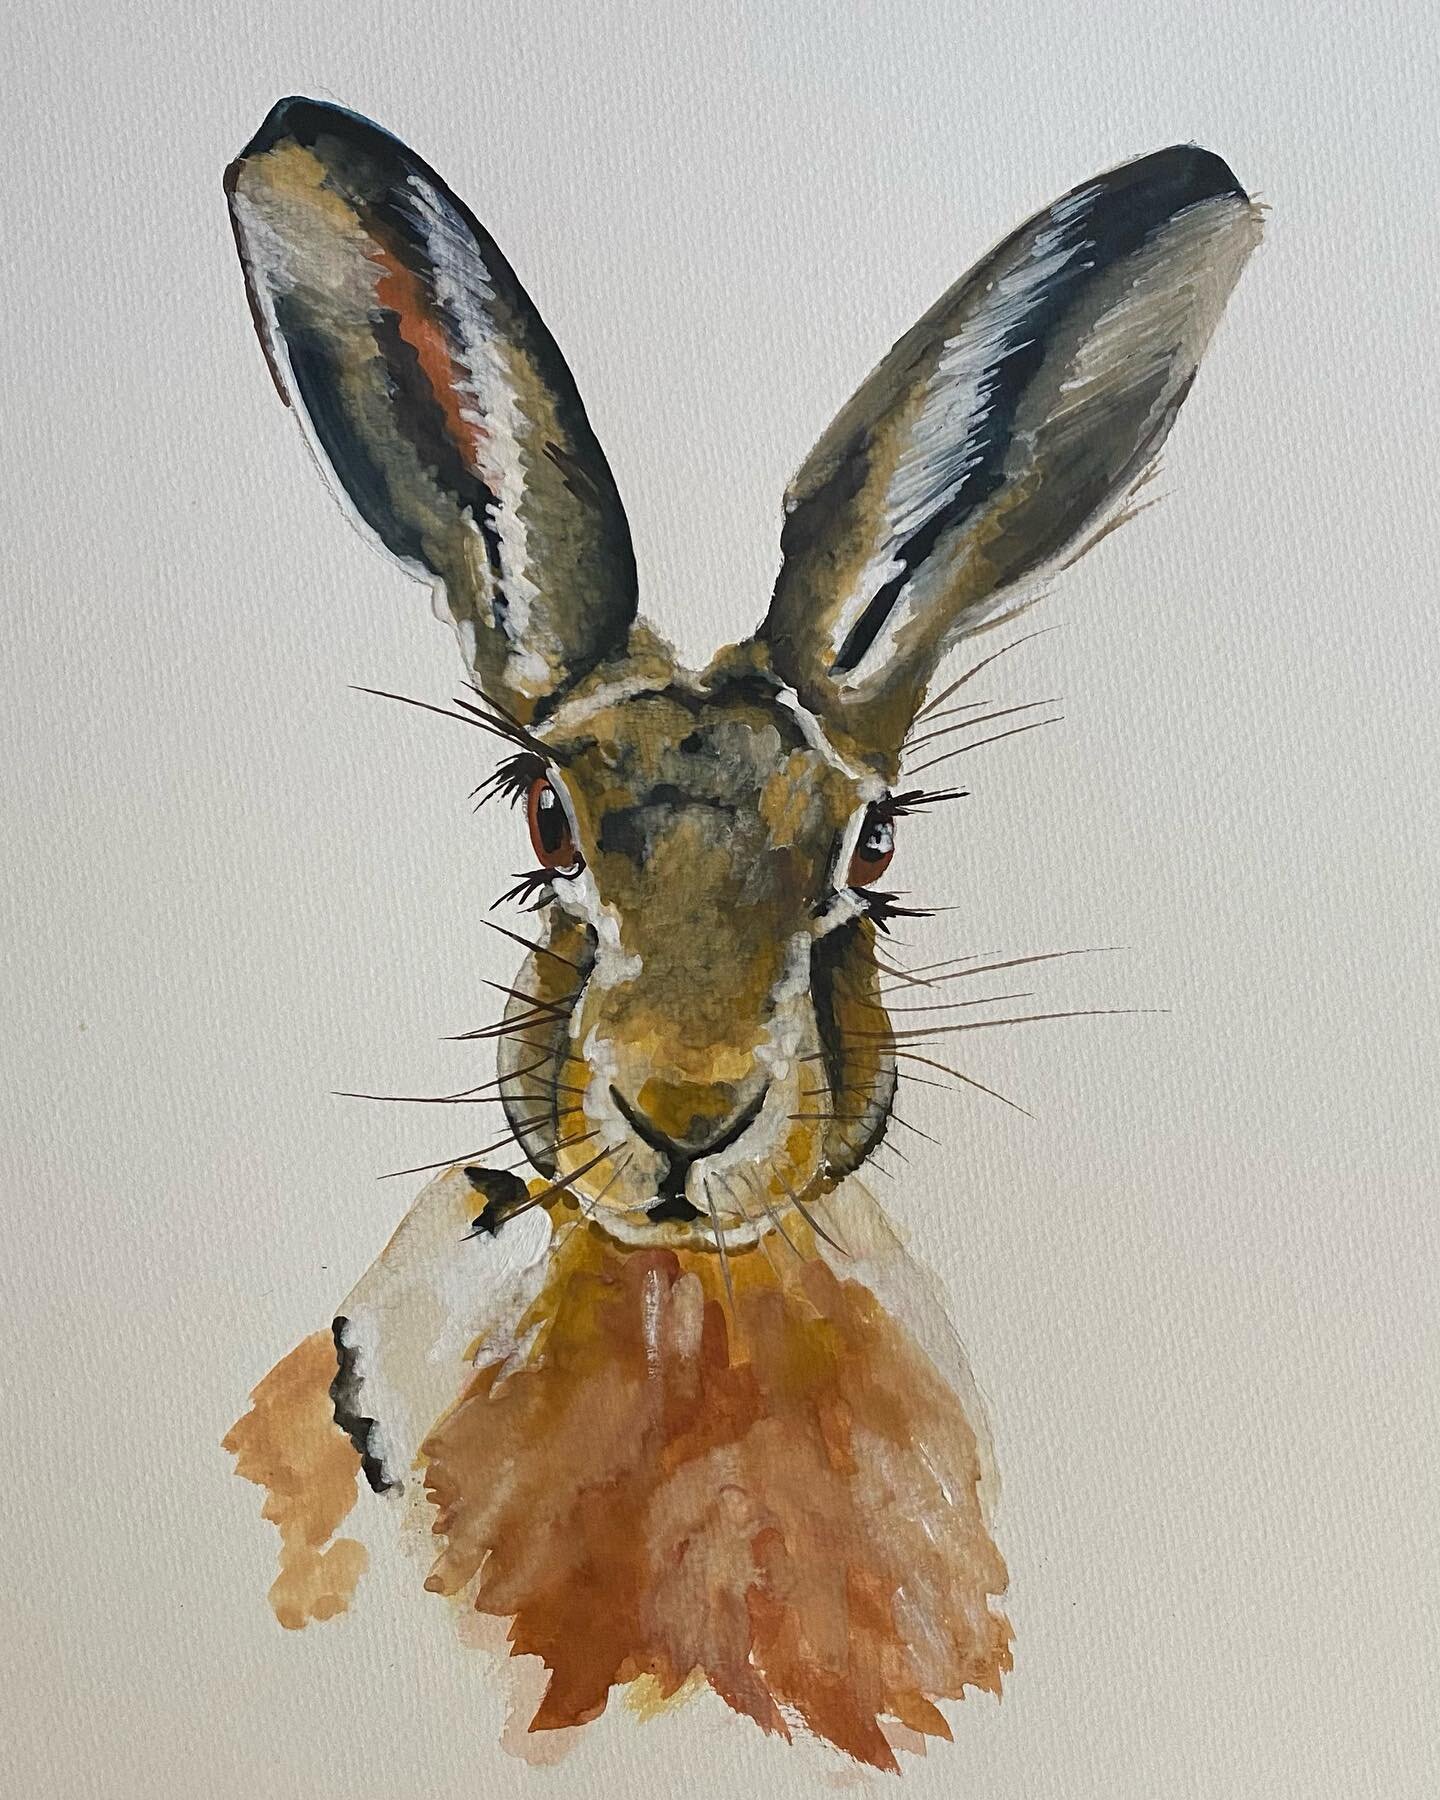 Hare
Hope you all had a Happy Easter!
Watercolor on paper